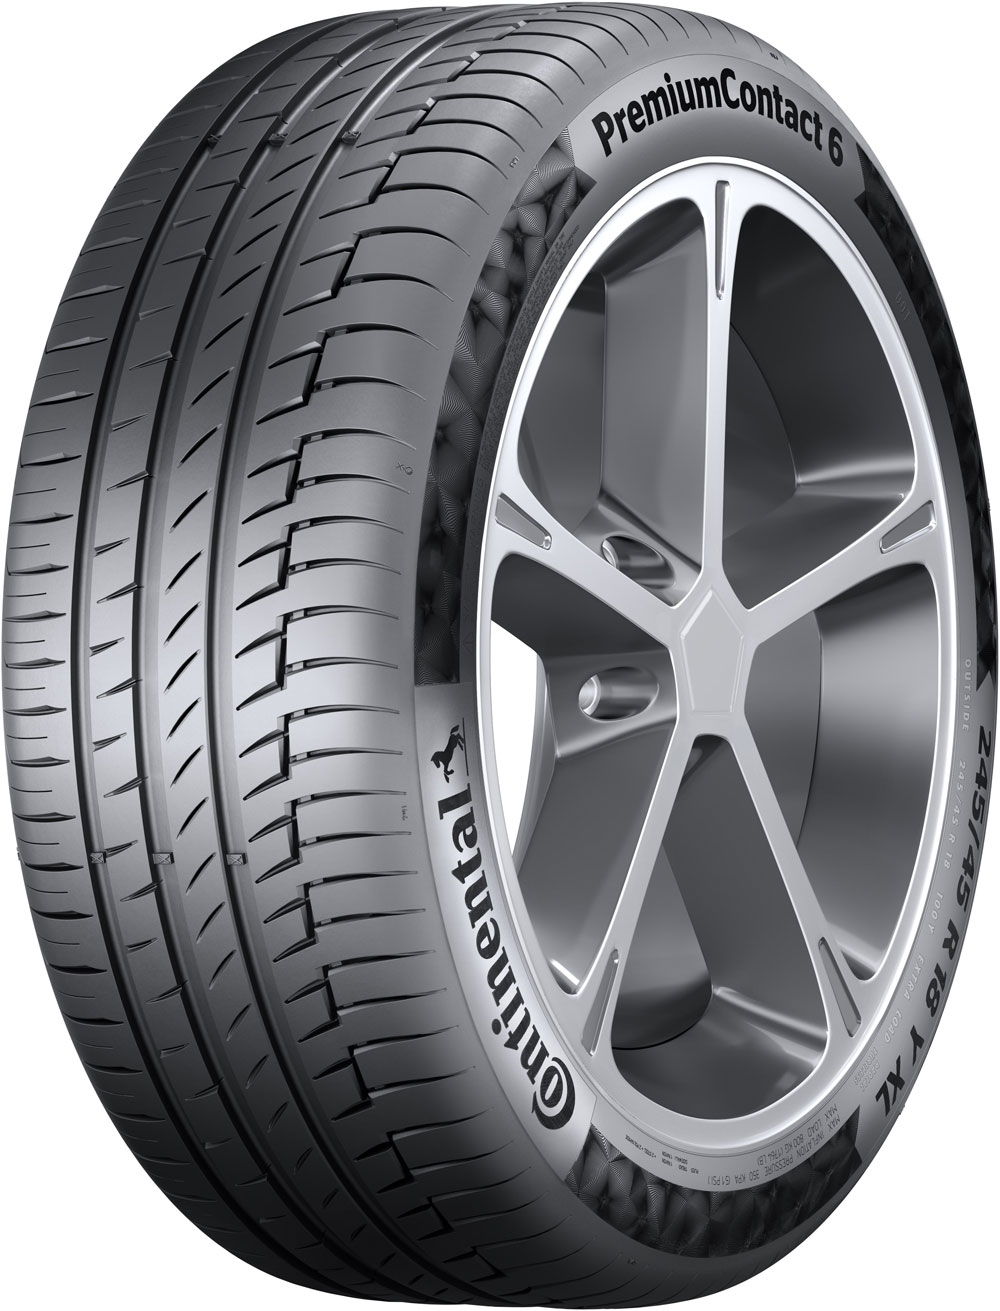 Anvelope jeep CONTINENTAL PREMIUM 6 AO XL AUDI FP DOT 2022 275/50 R20 113Y